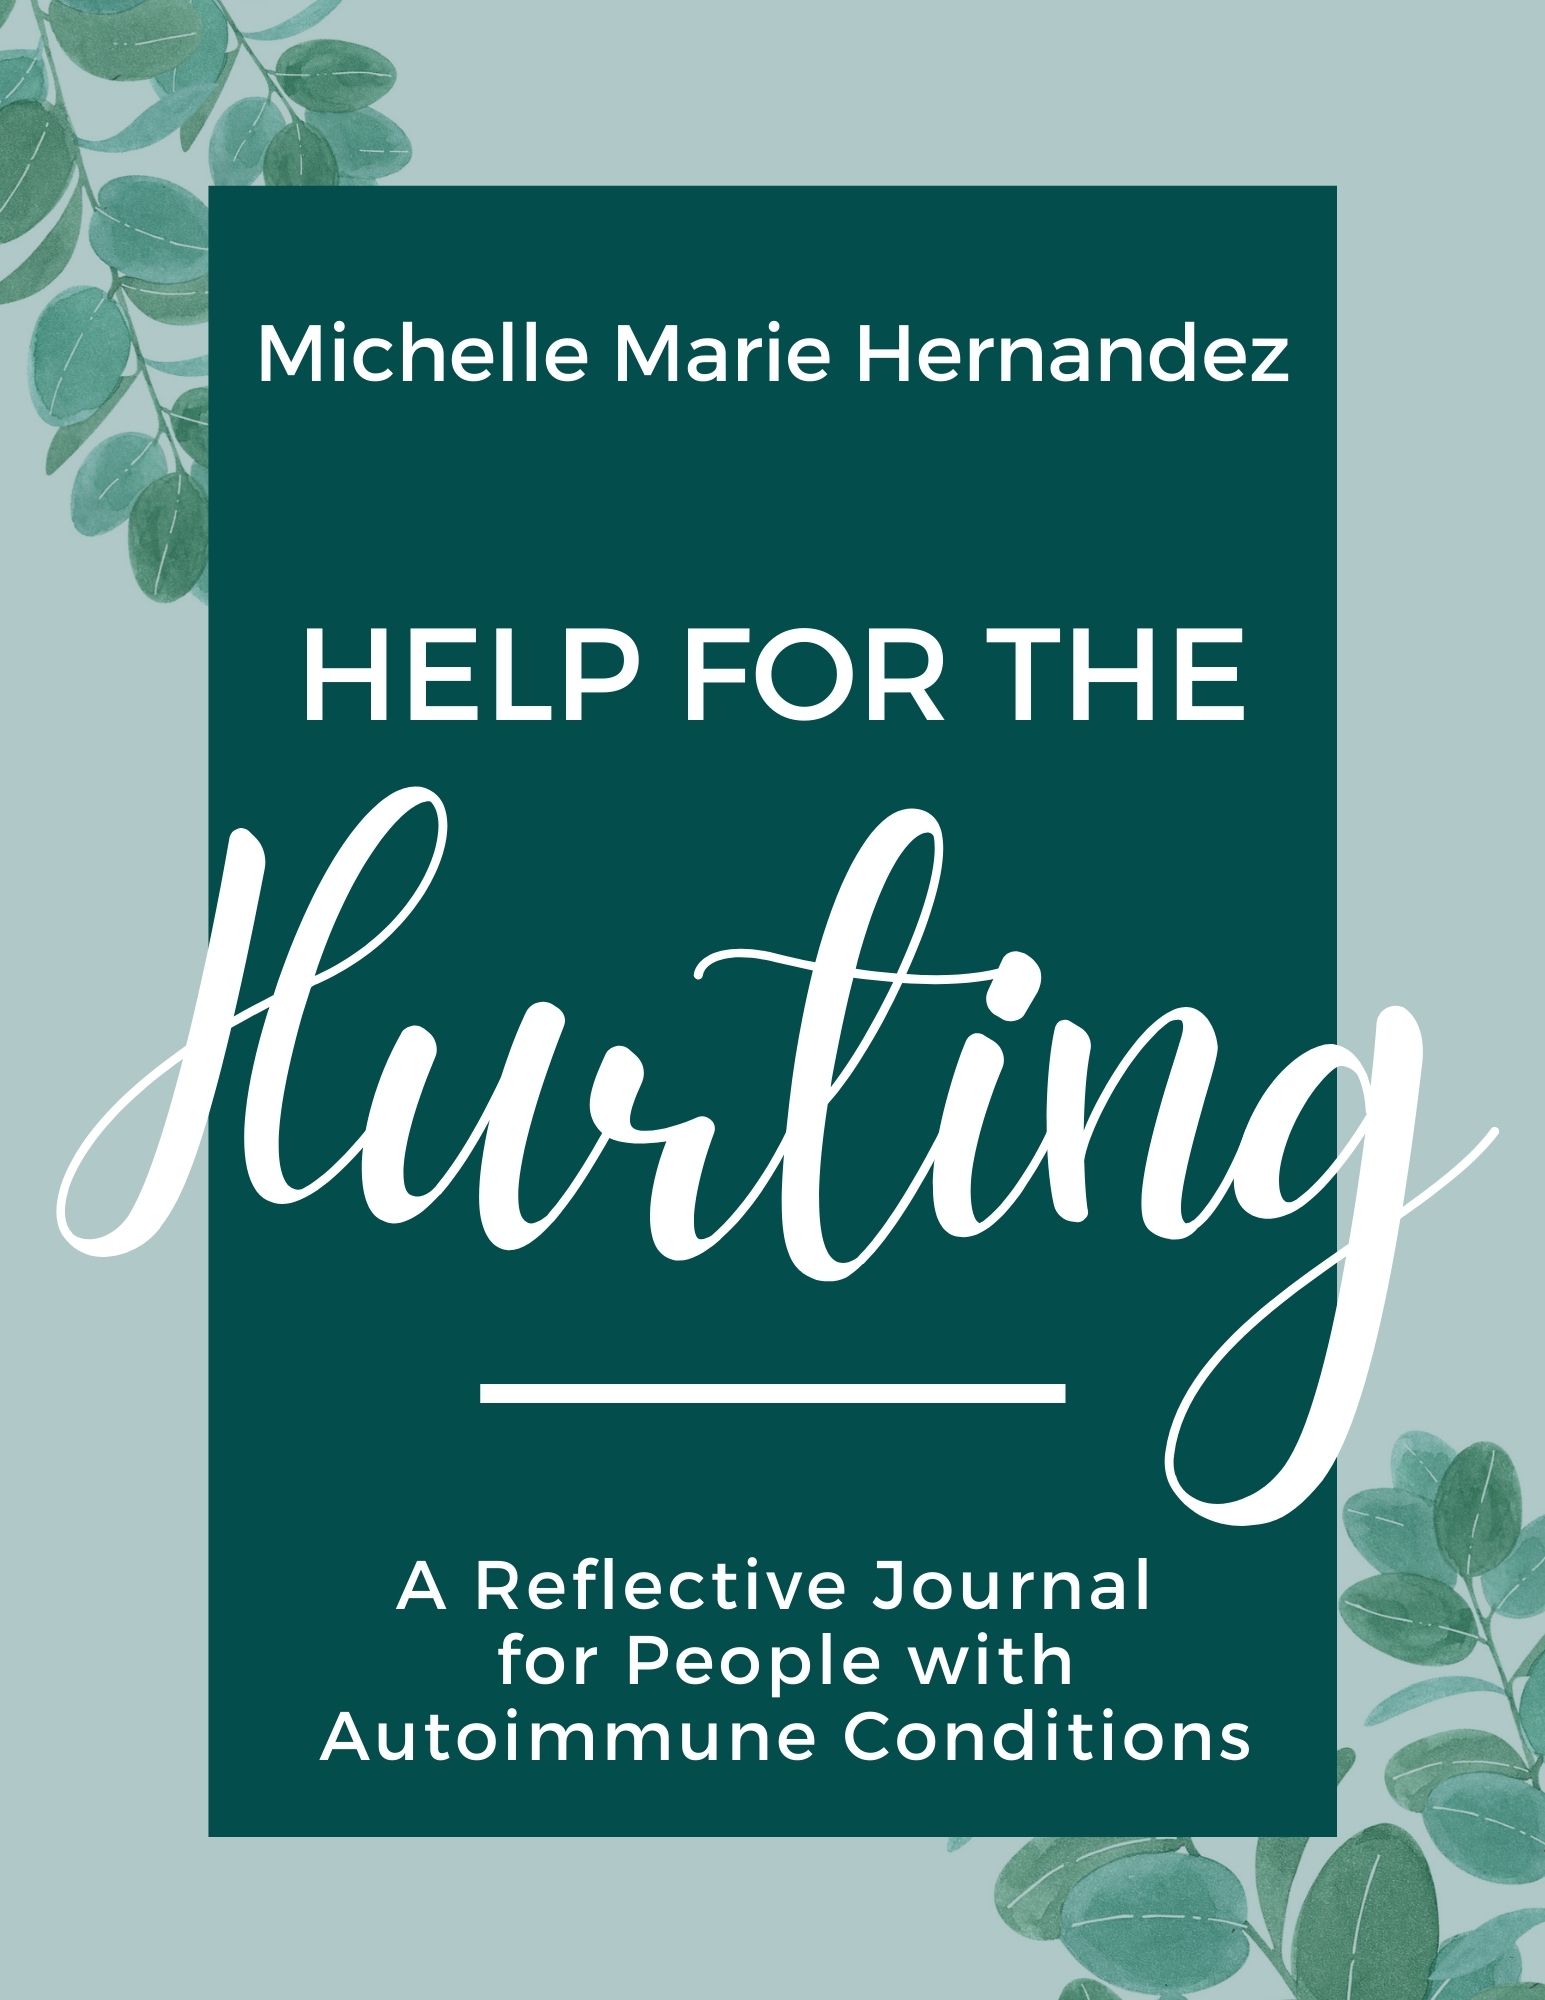 Help for the hurting, a journal for people with autoimmune conditions